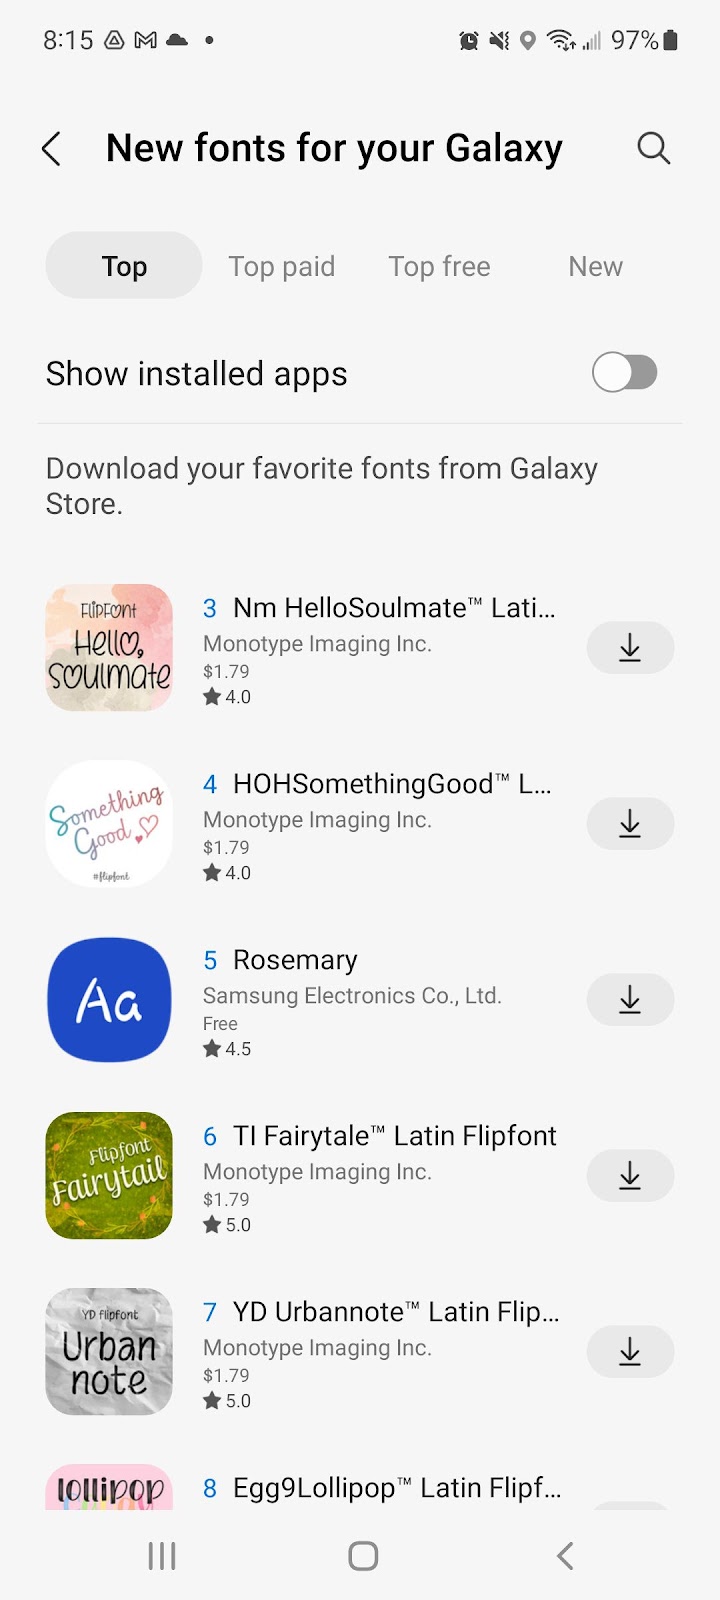 New fonts for your Galaxy